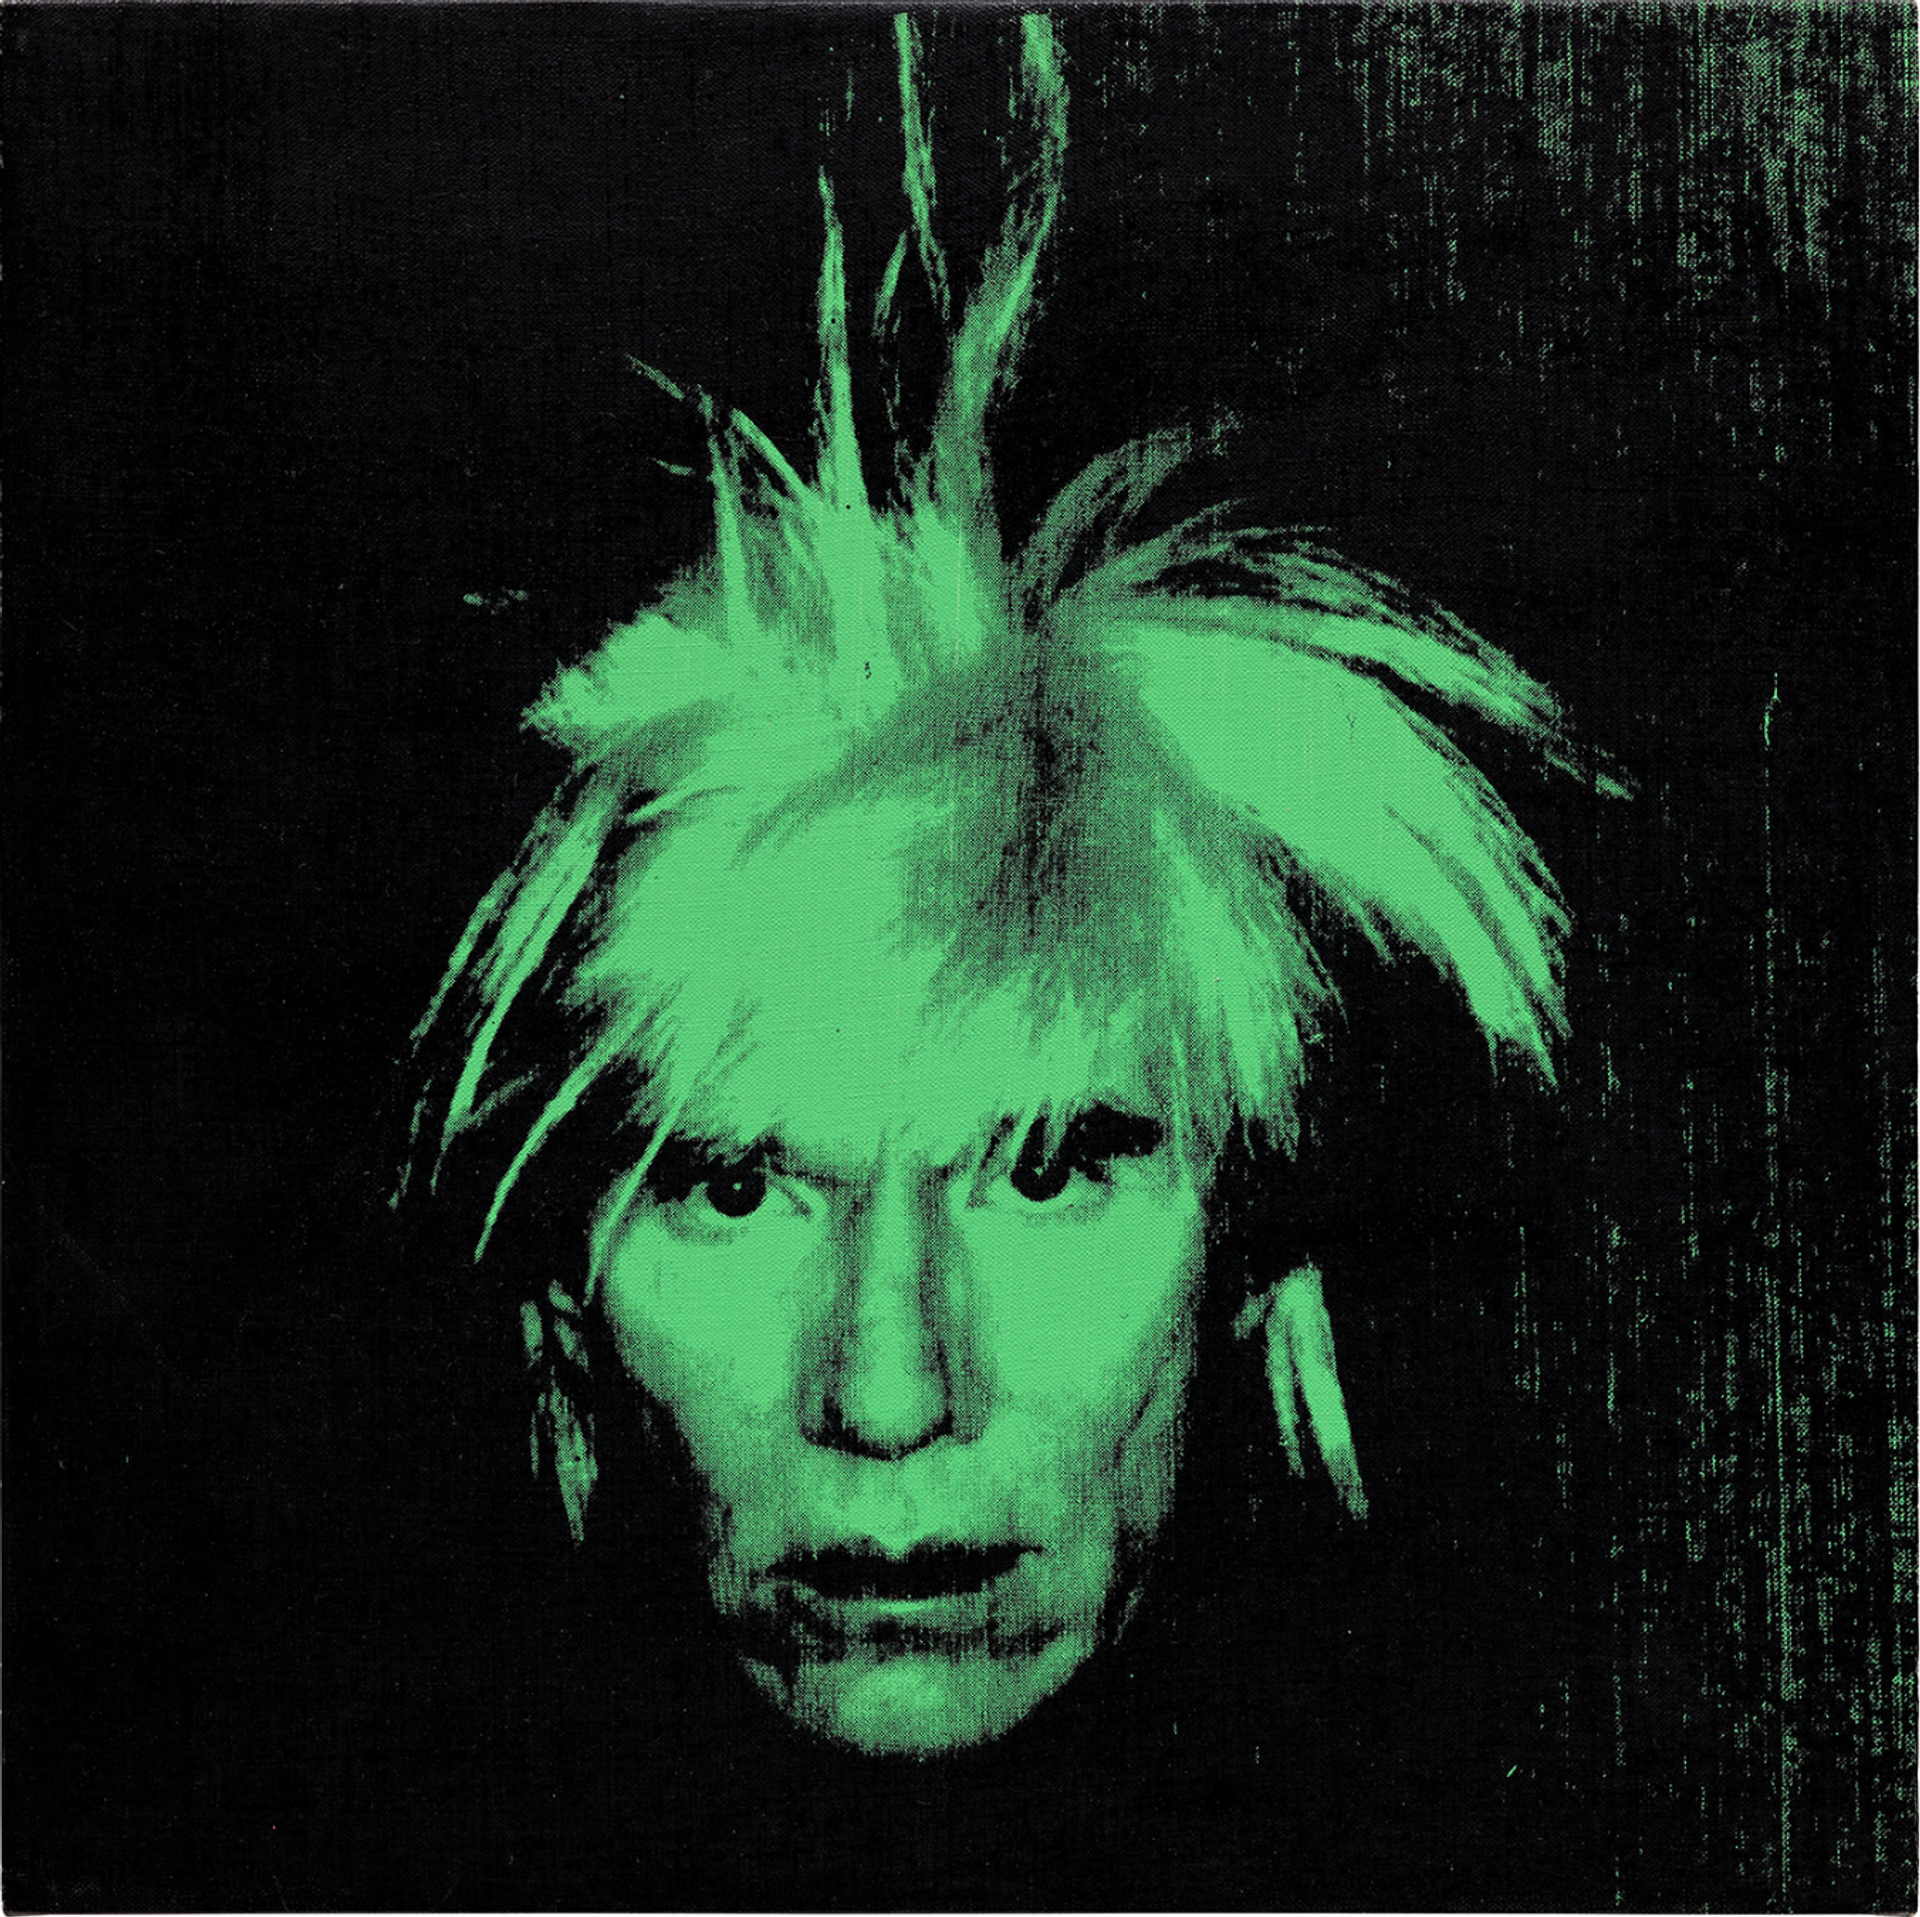 Image © Phillips / Self-Portrait (Fright Wig) © Andy Warhol 1986